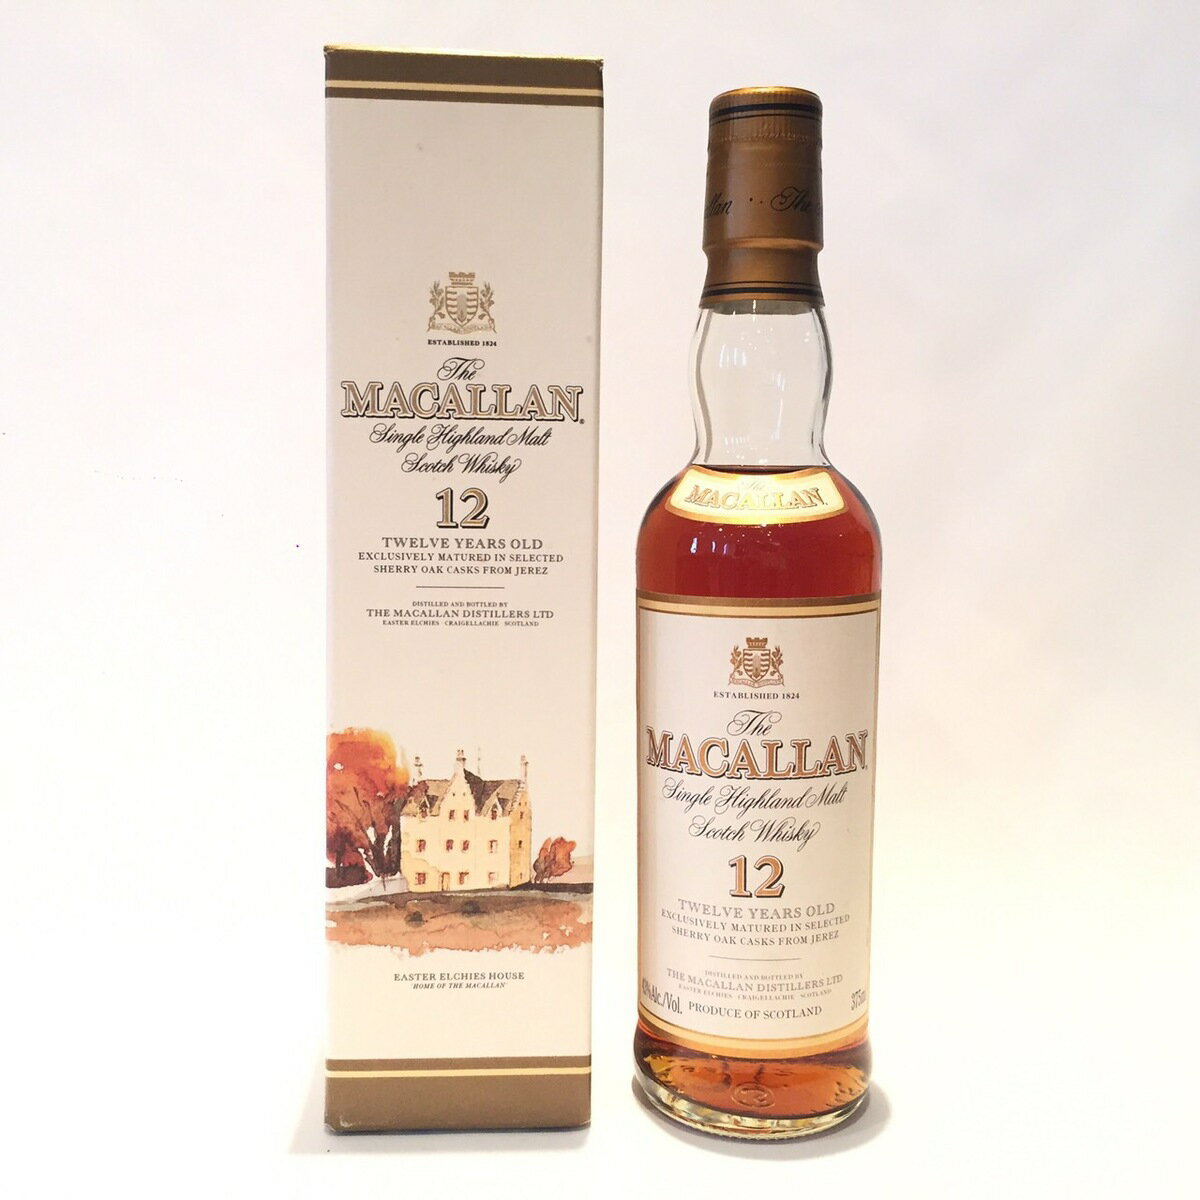 }bJ Macallan 12 Years Old 43% / 37.5cl